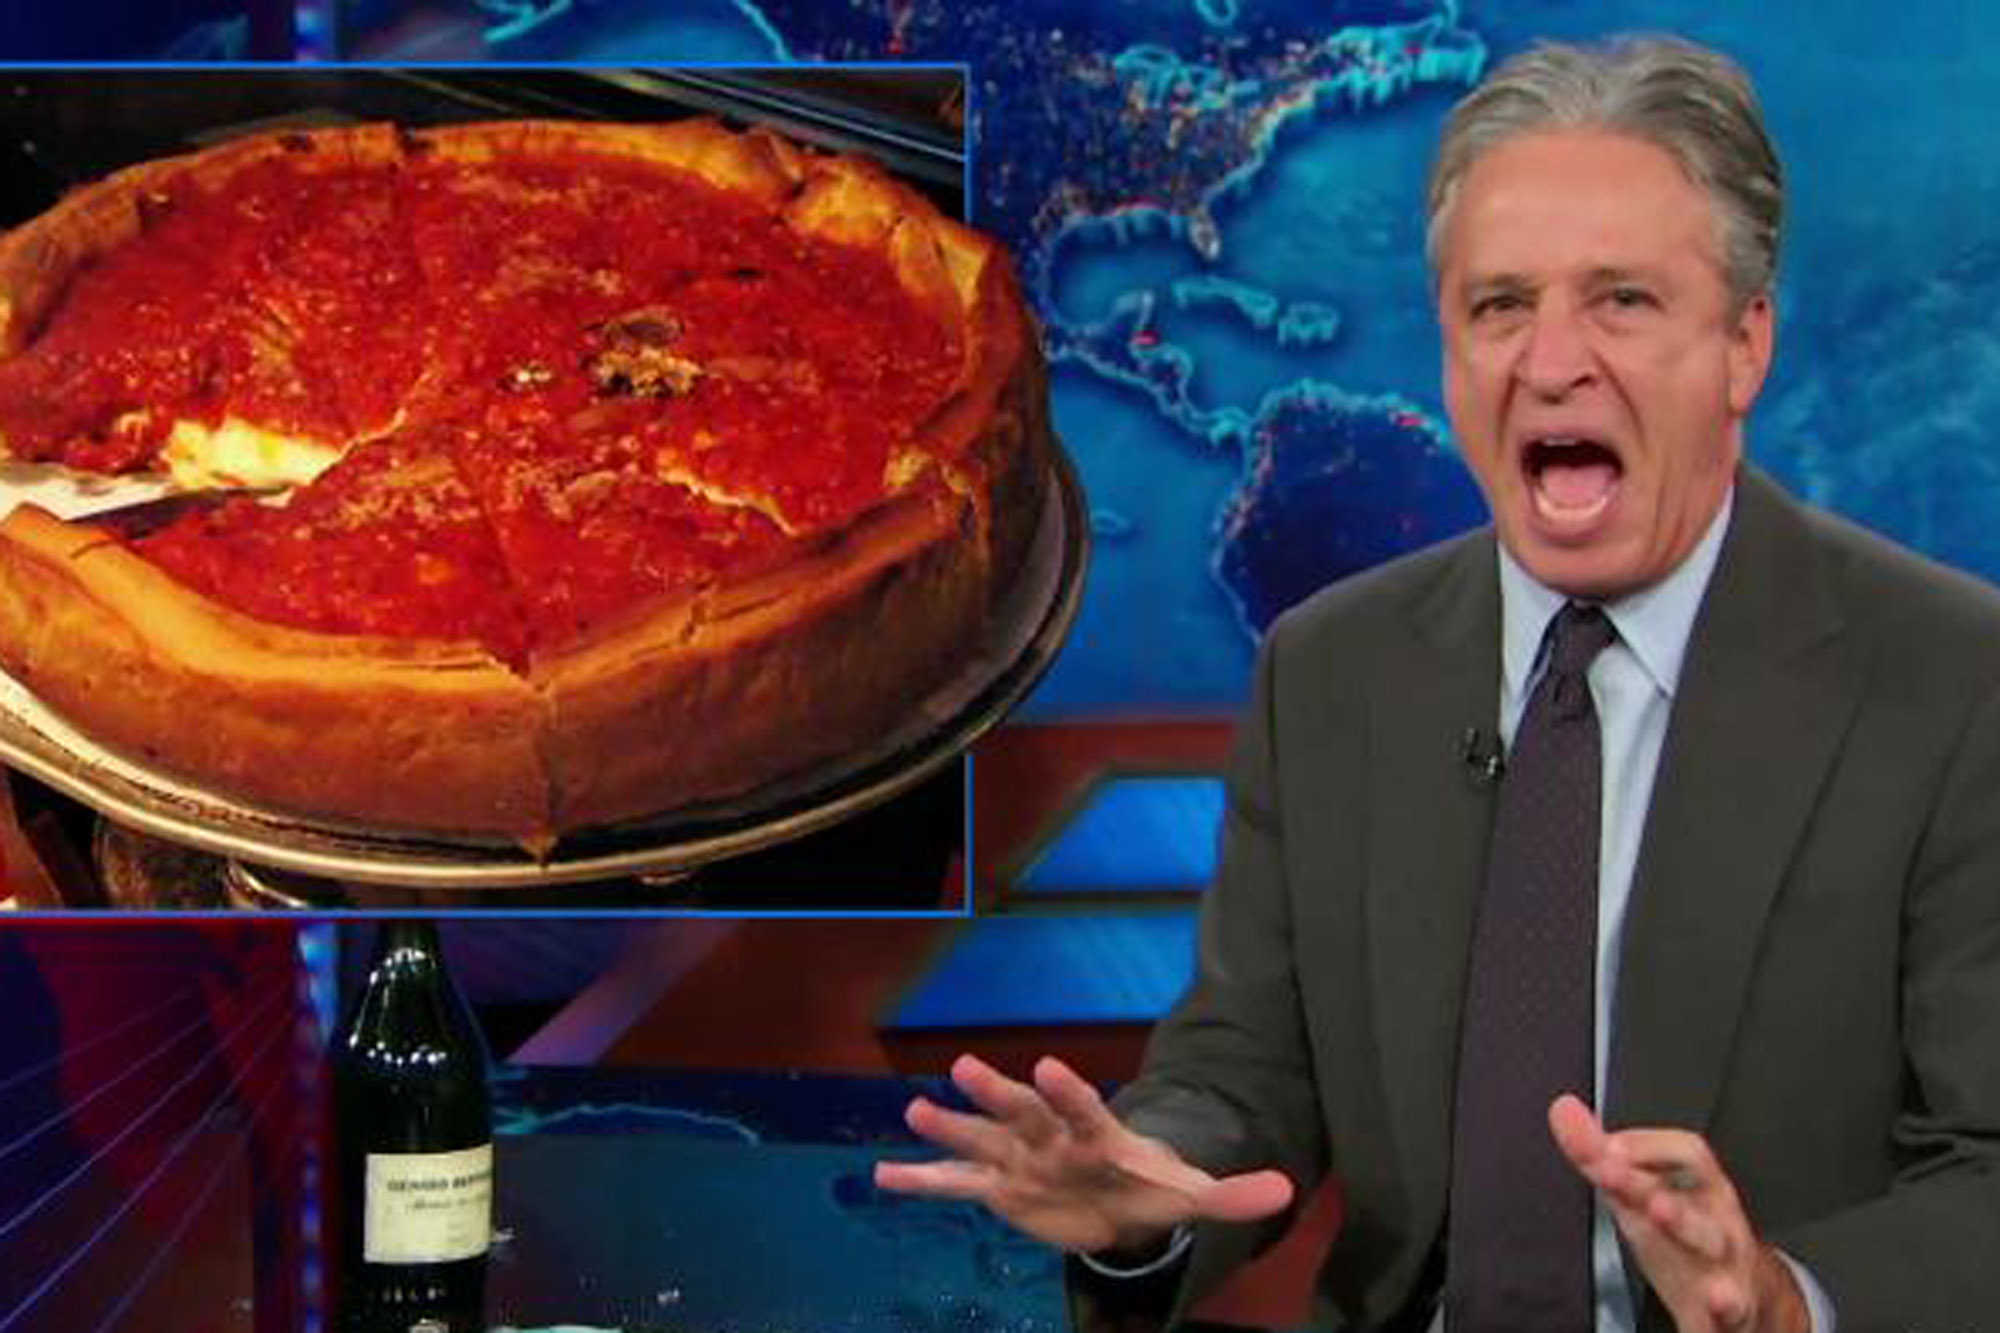 Jon Stewart takes down Chicago's deep dish pizza in an epic "Daily Show" rant. Photo: Youtube